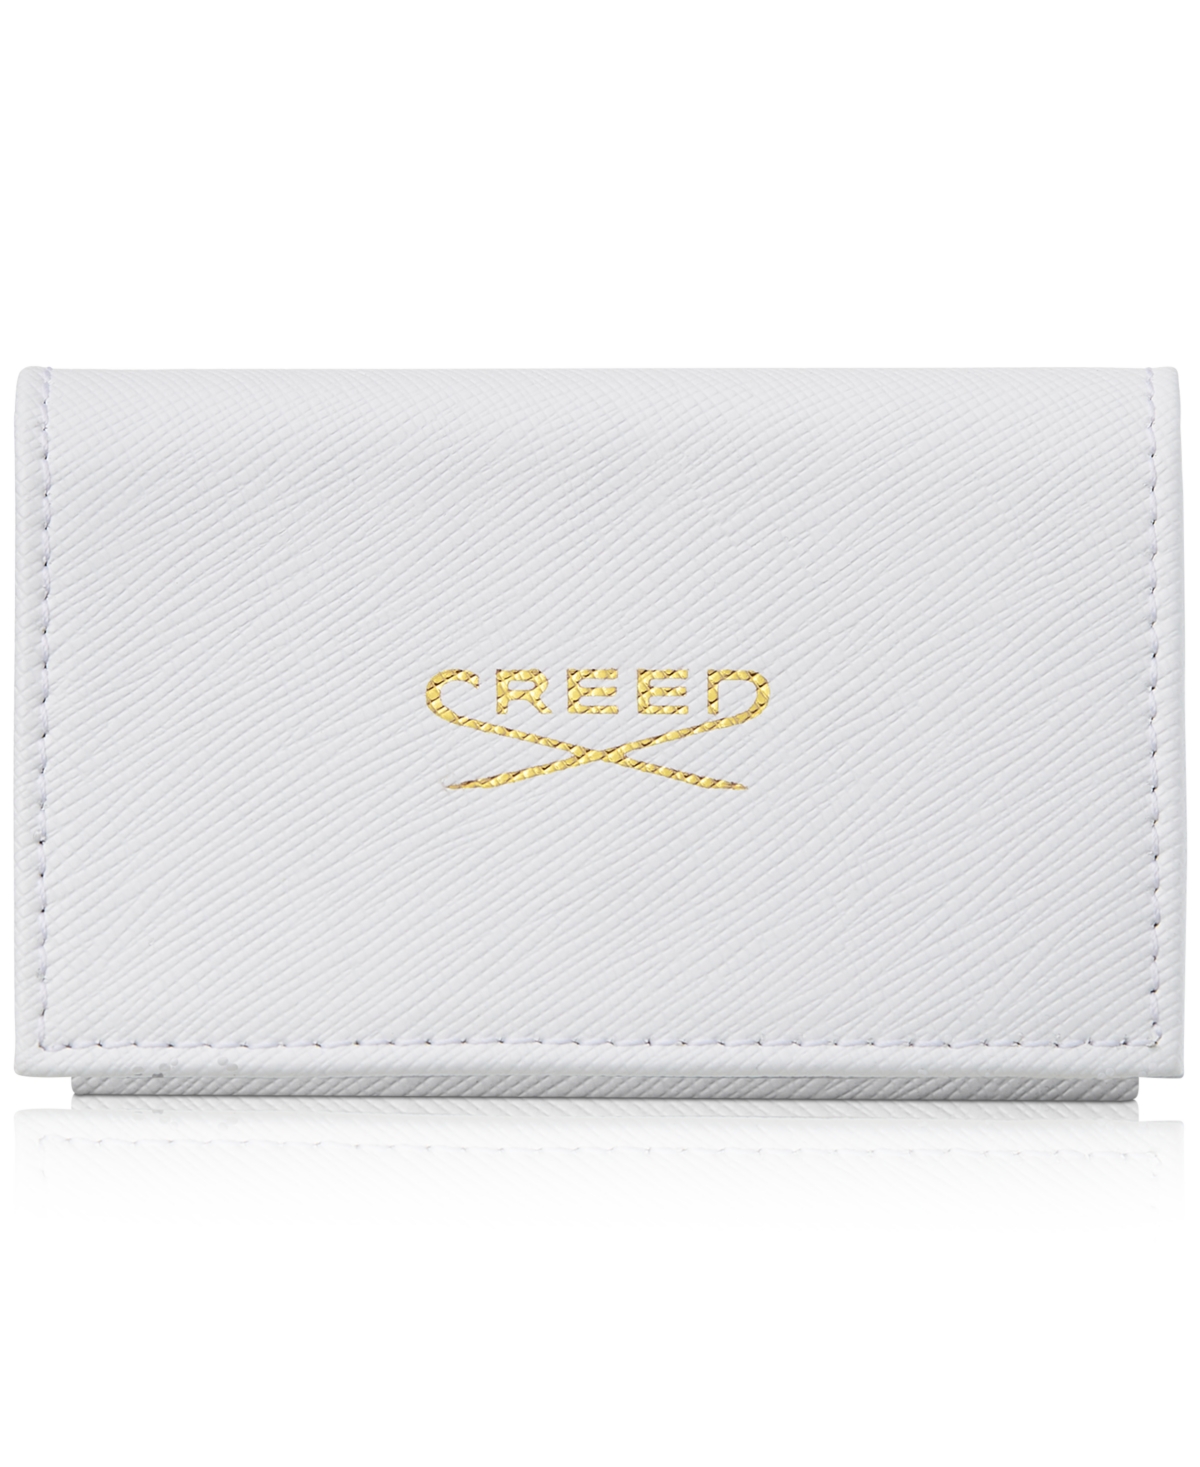 Creed Women's 9-pc. White Leather Wallet Gift Set